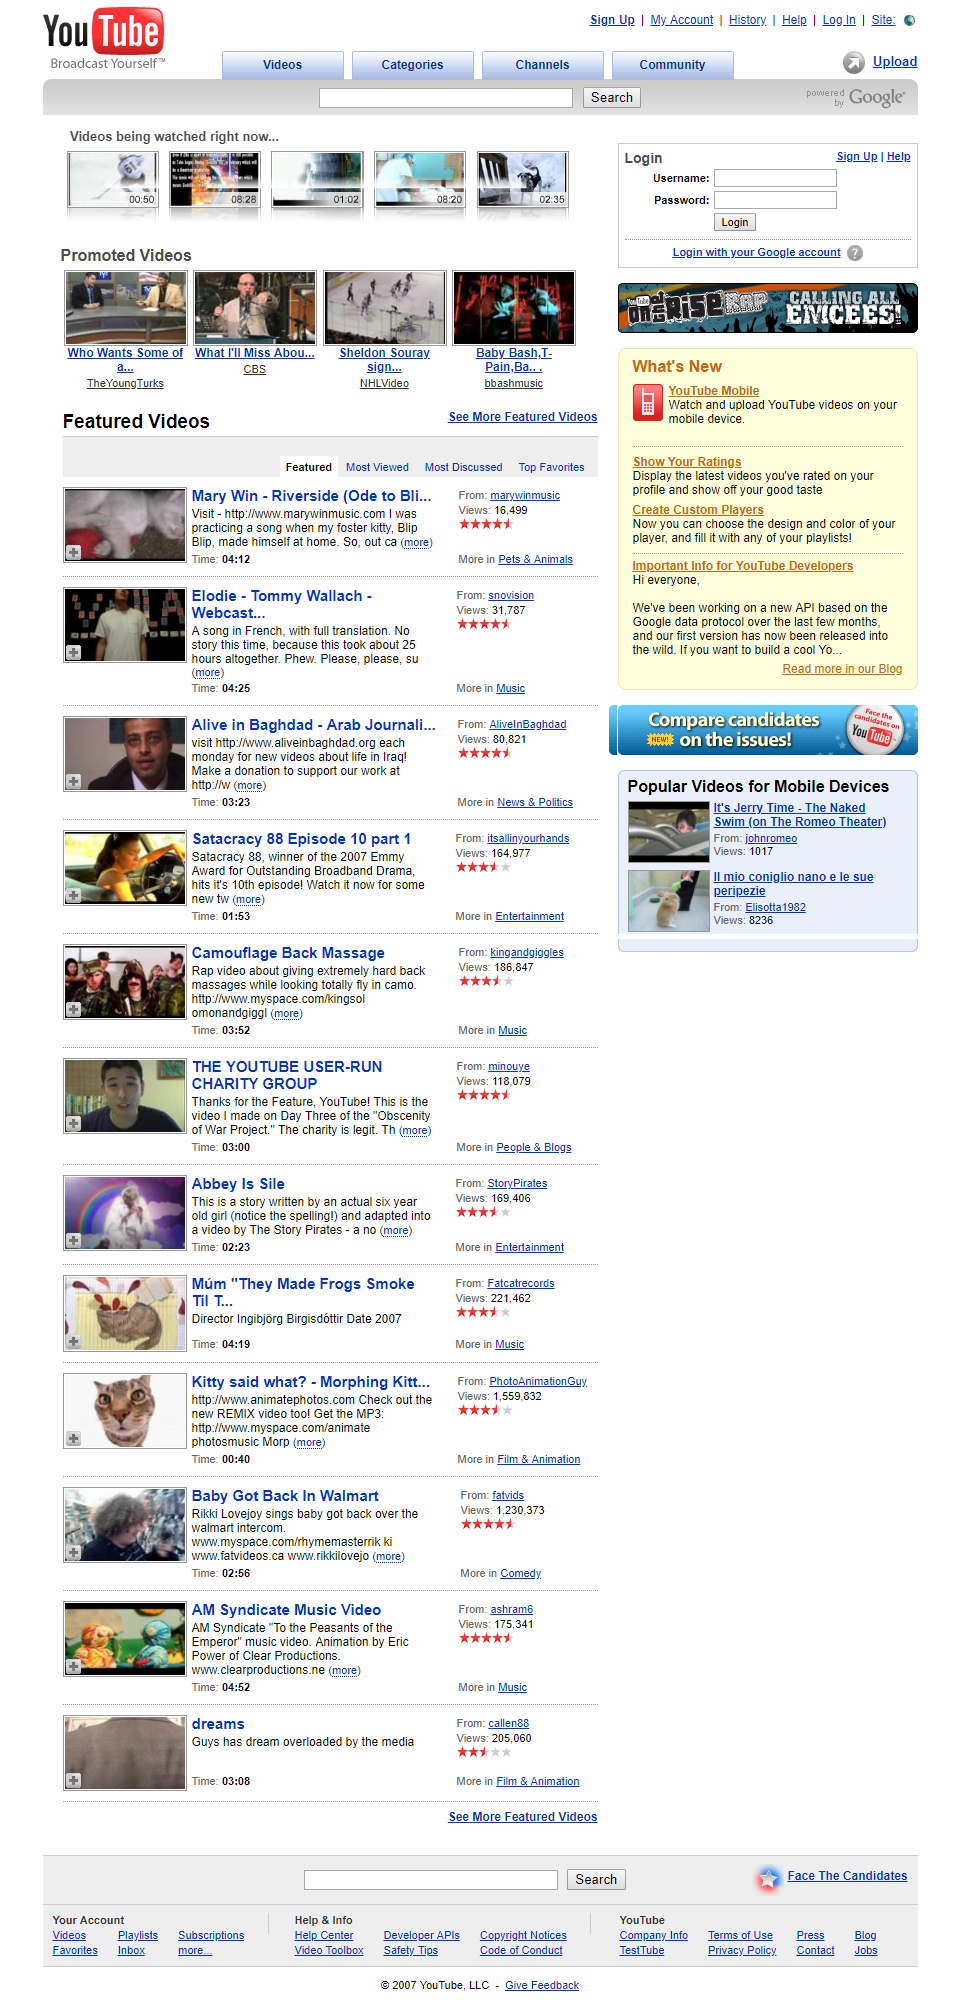 Youtube In 2007 Timeline Web Design Museum - how to get the old roblox website back youtube